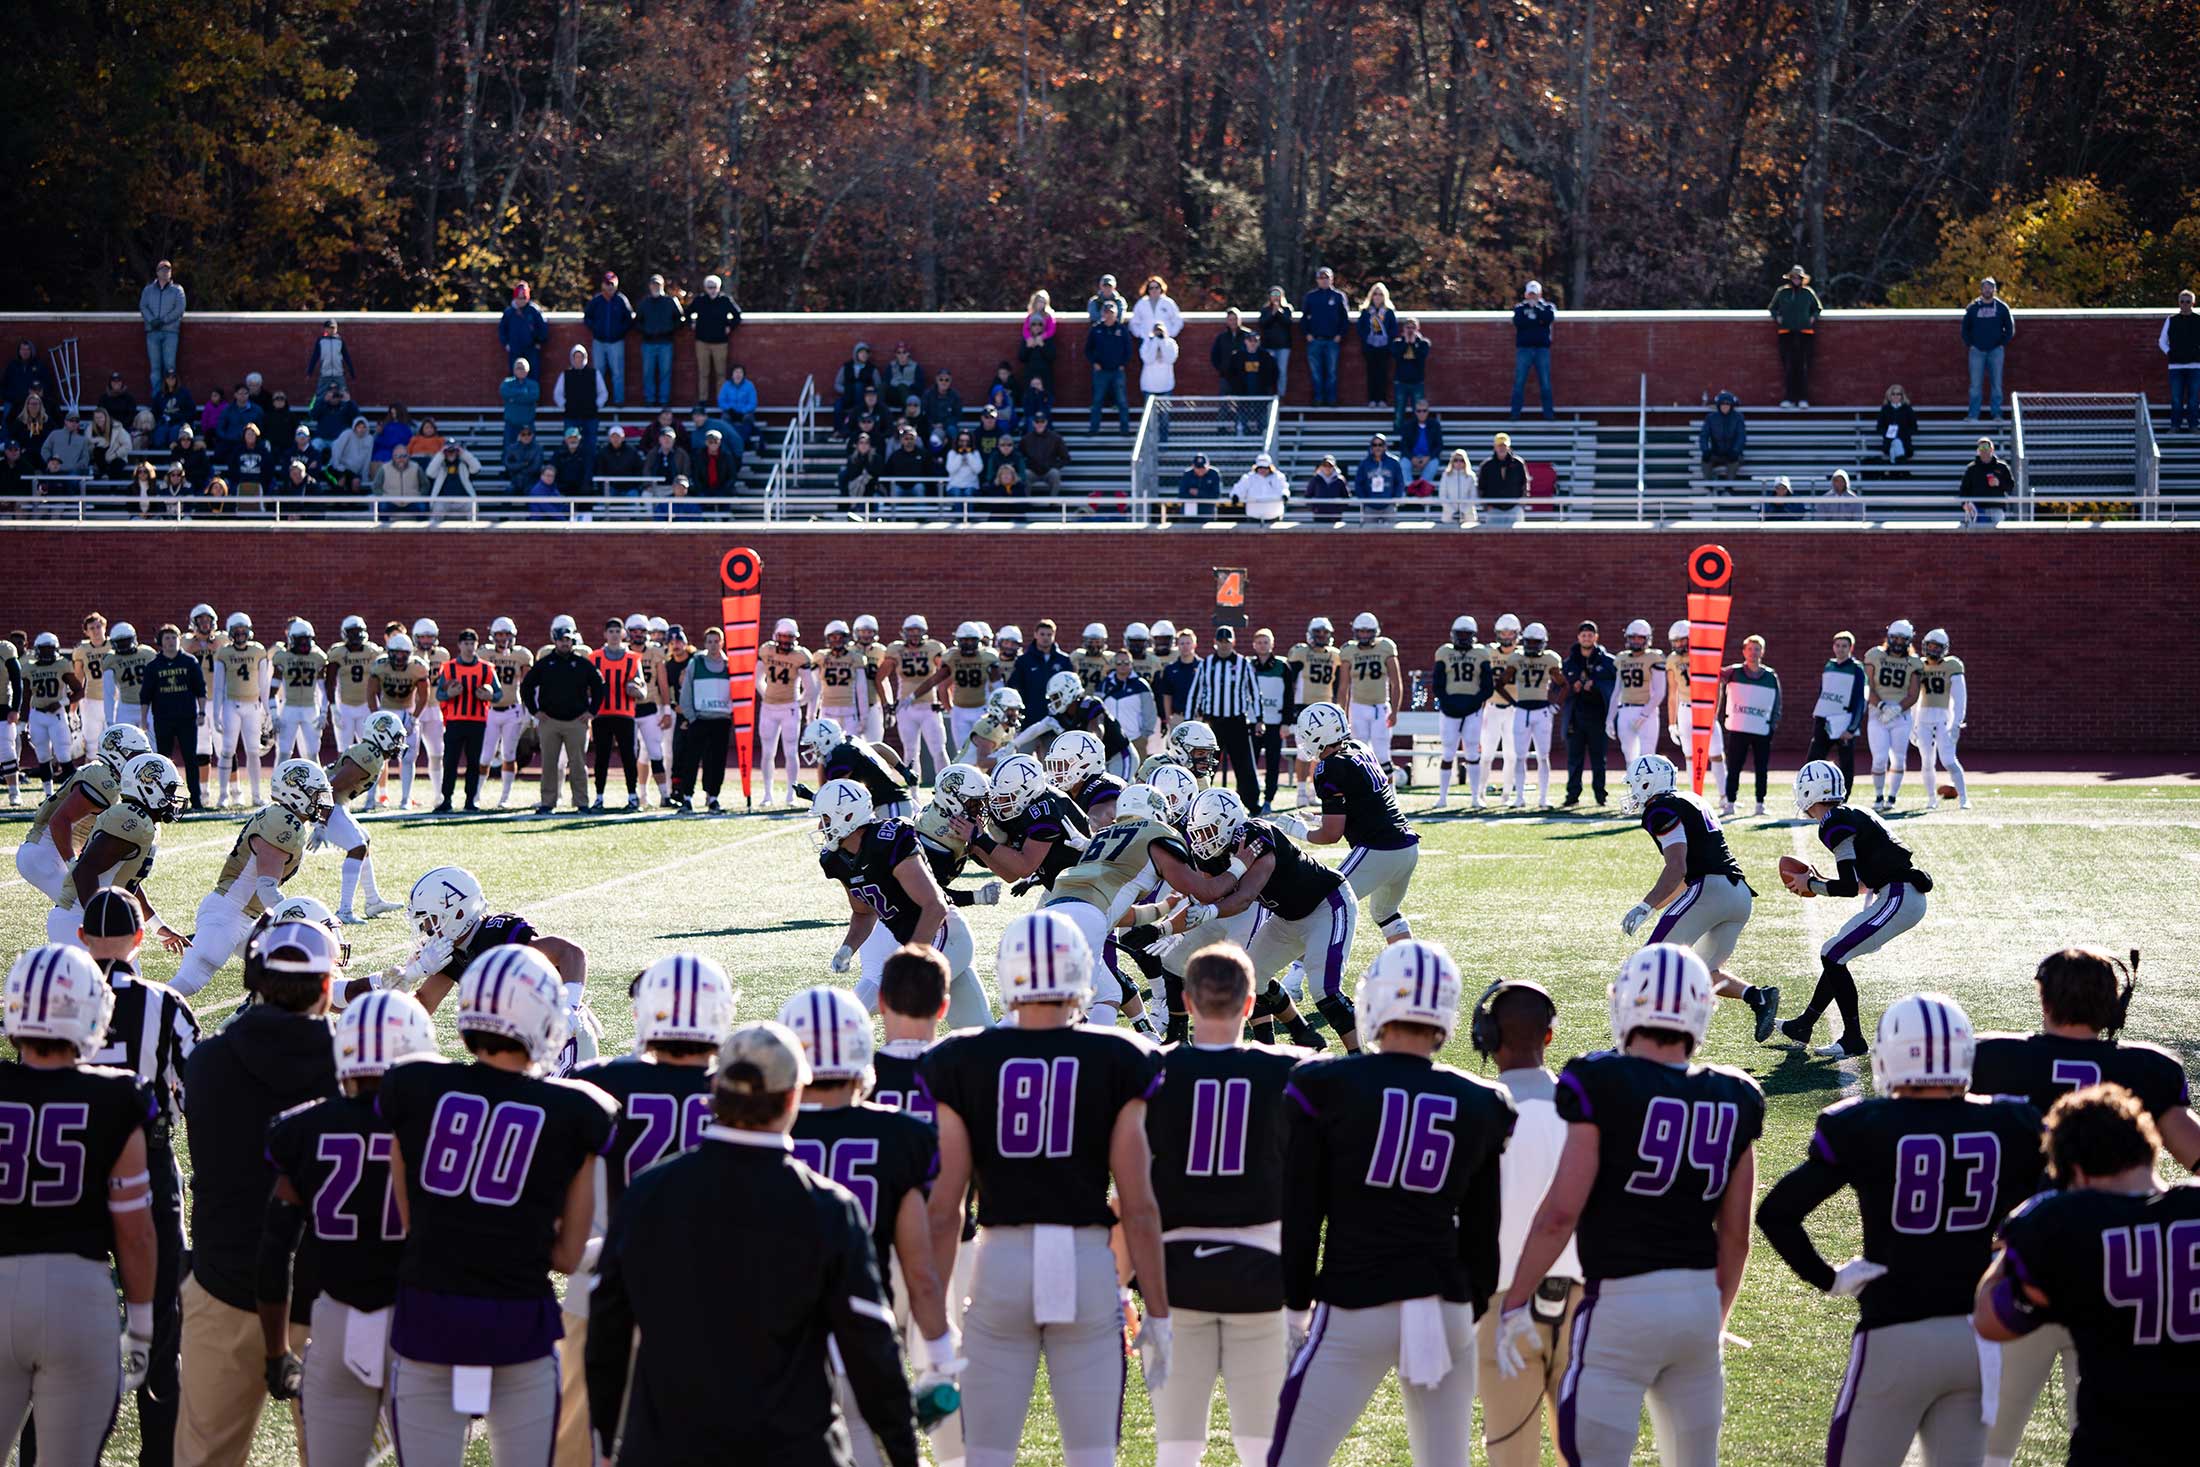 Football game between Amherst College and Trinity College